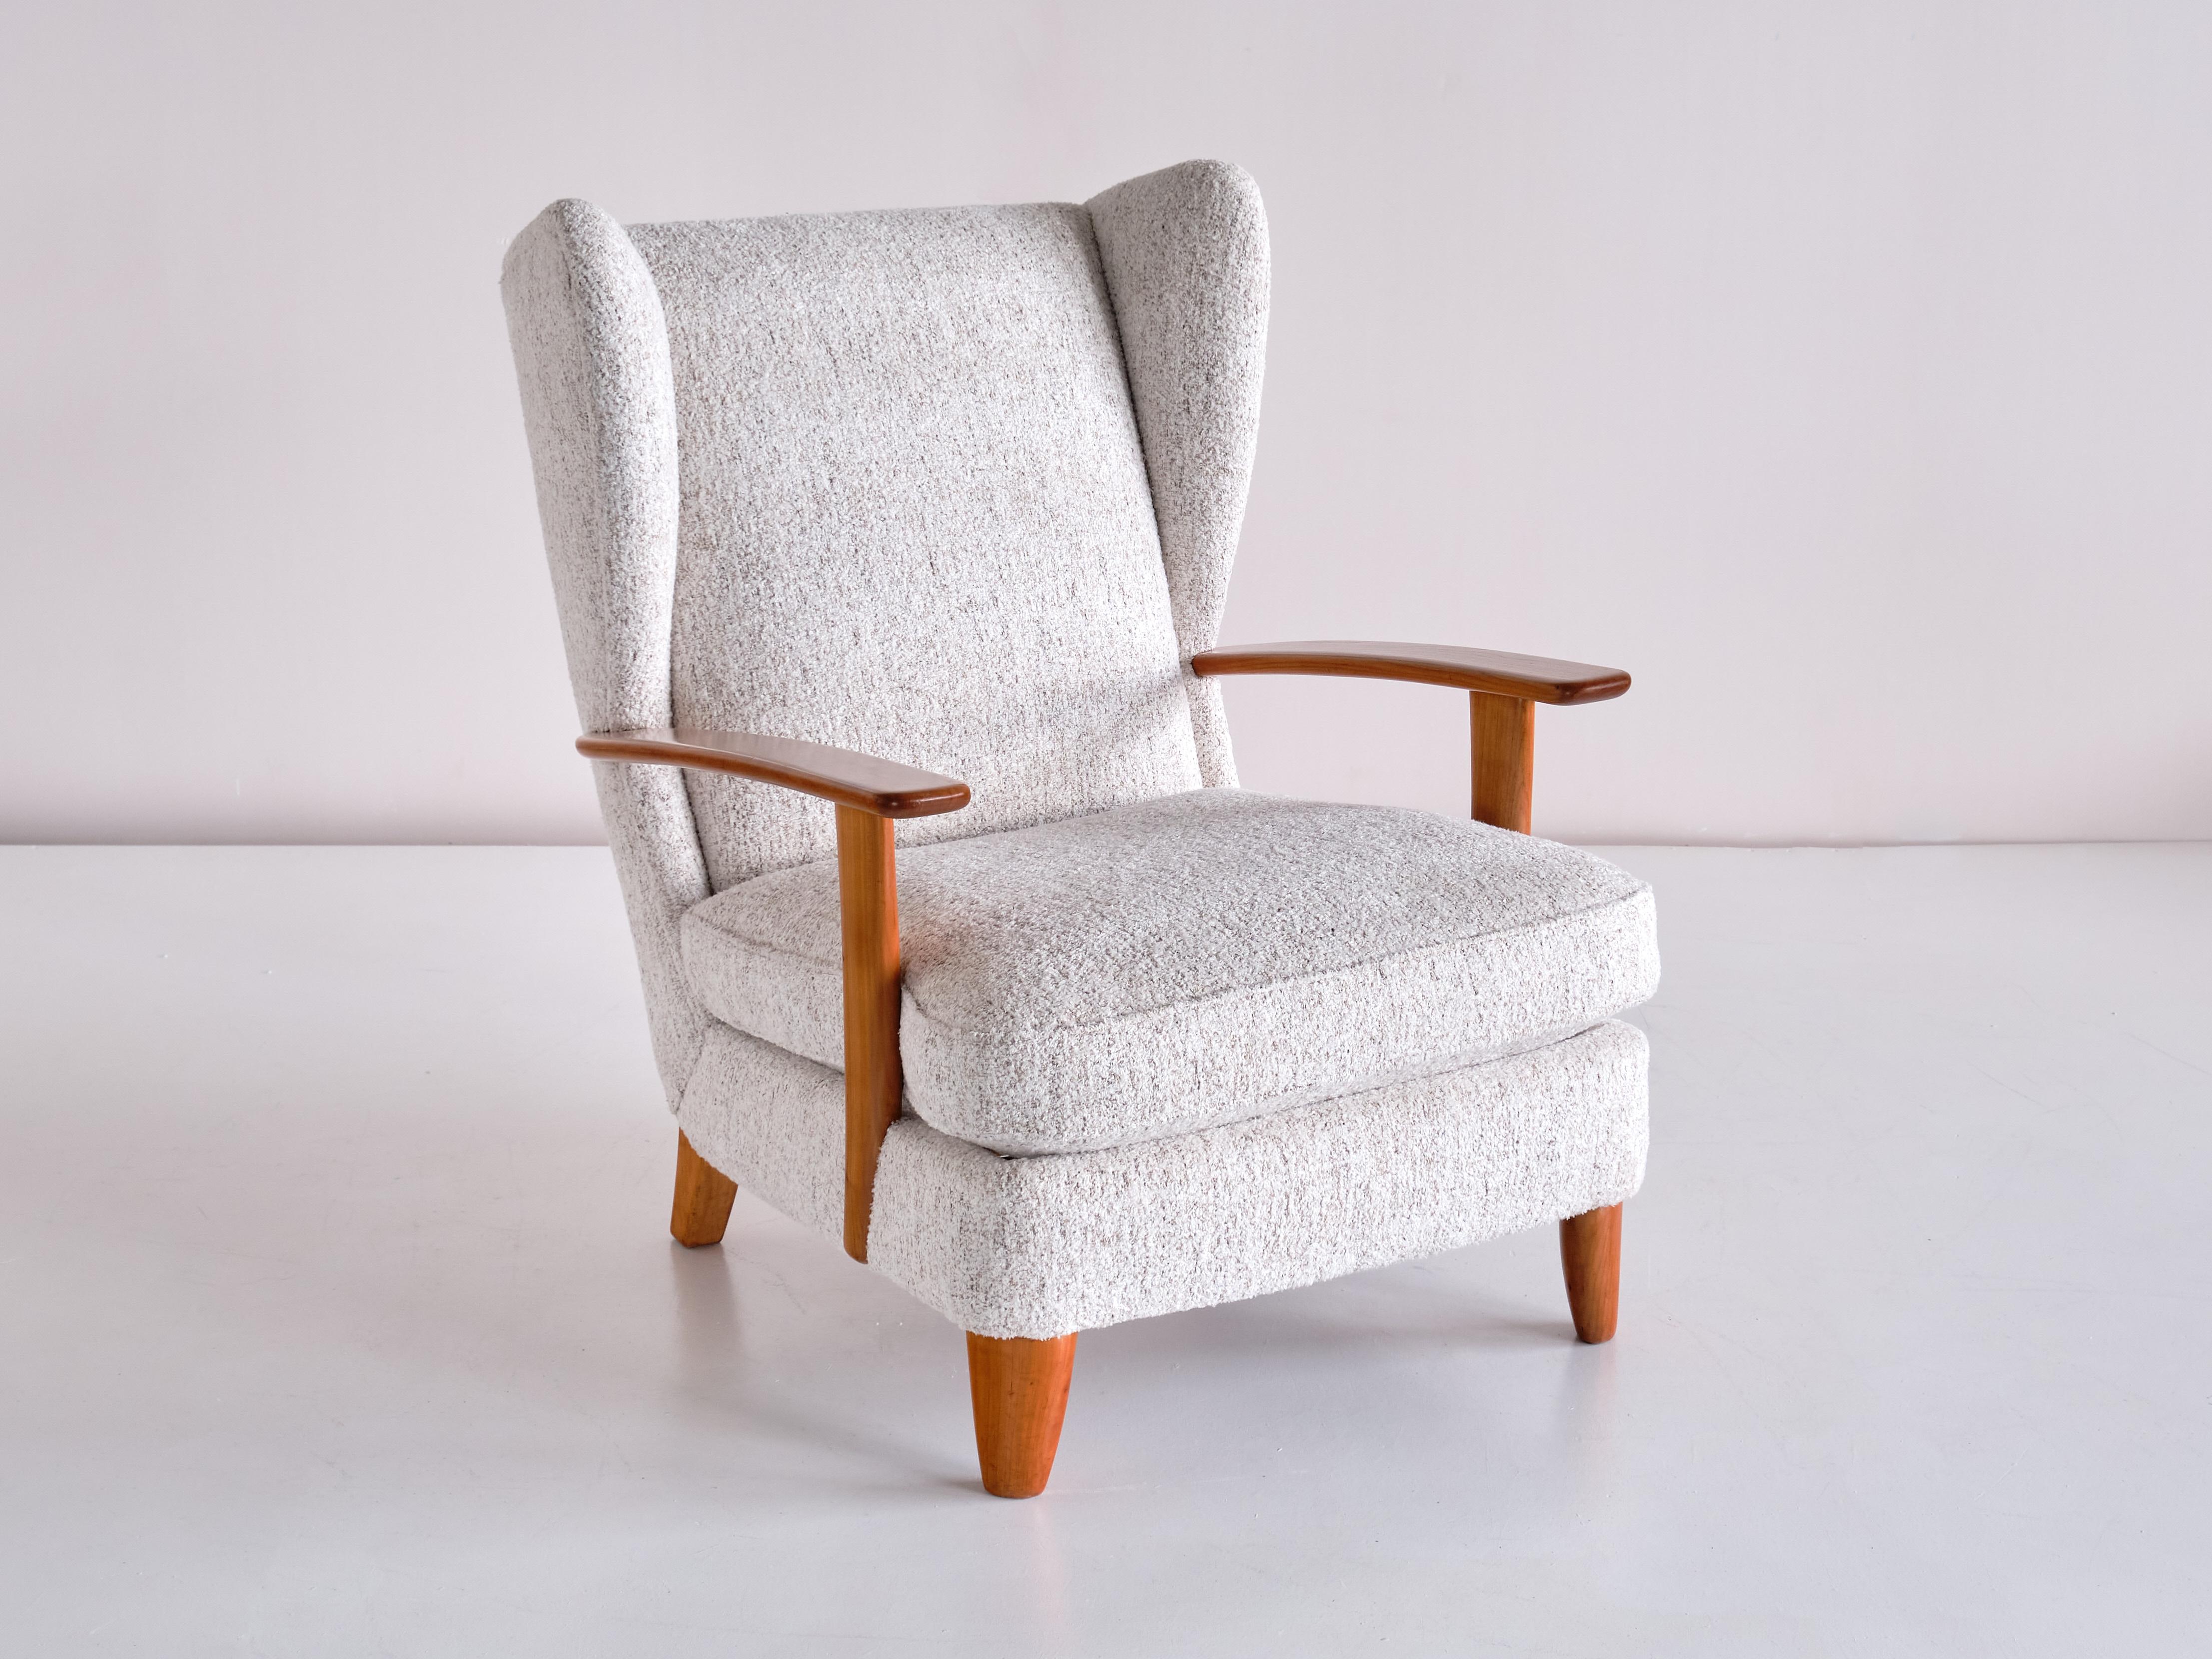 Gio Ponti Wingback Chair in Cherry Wood and Mélange Nobilis Fabric, Italy, 1929 In Good Condition For Sale In The Hague, NL